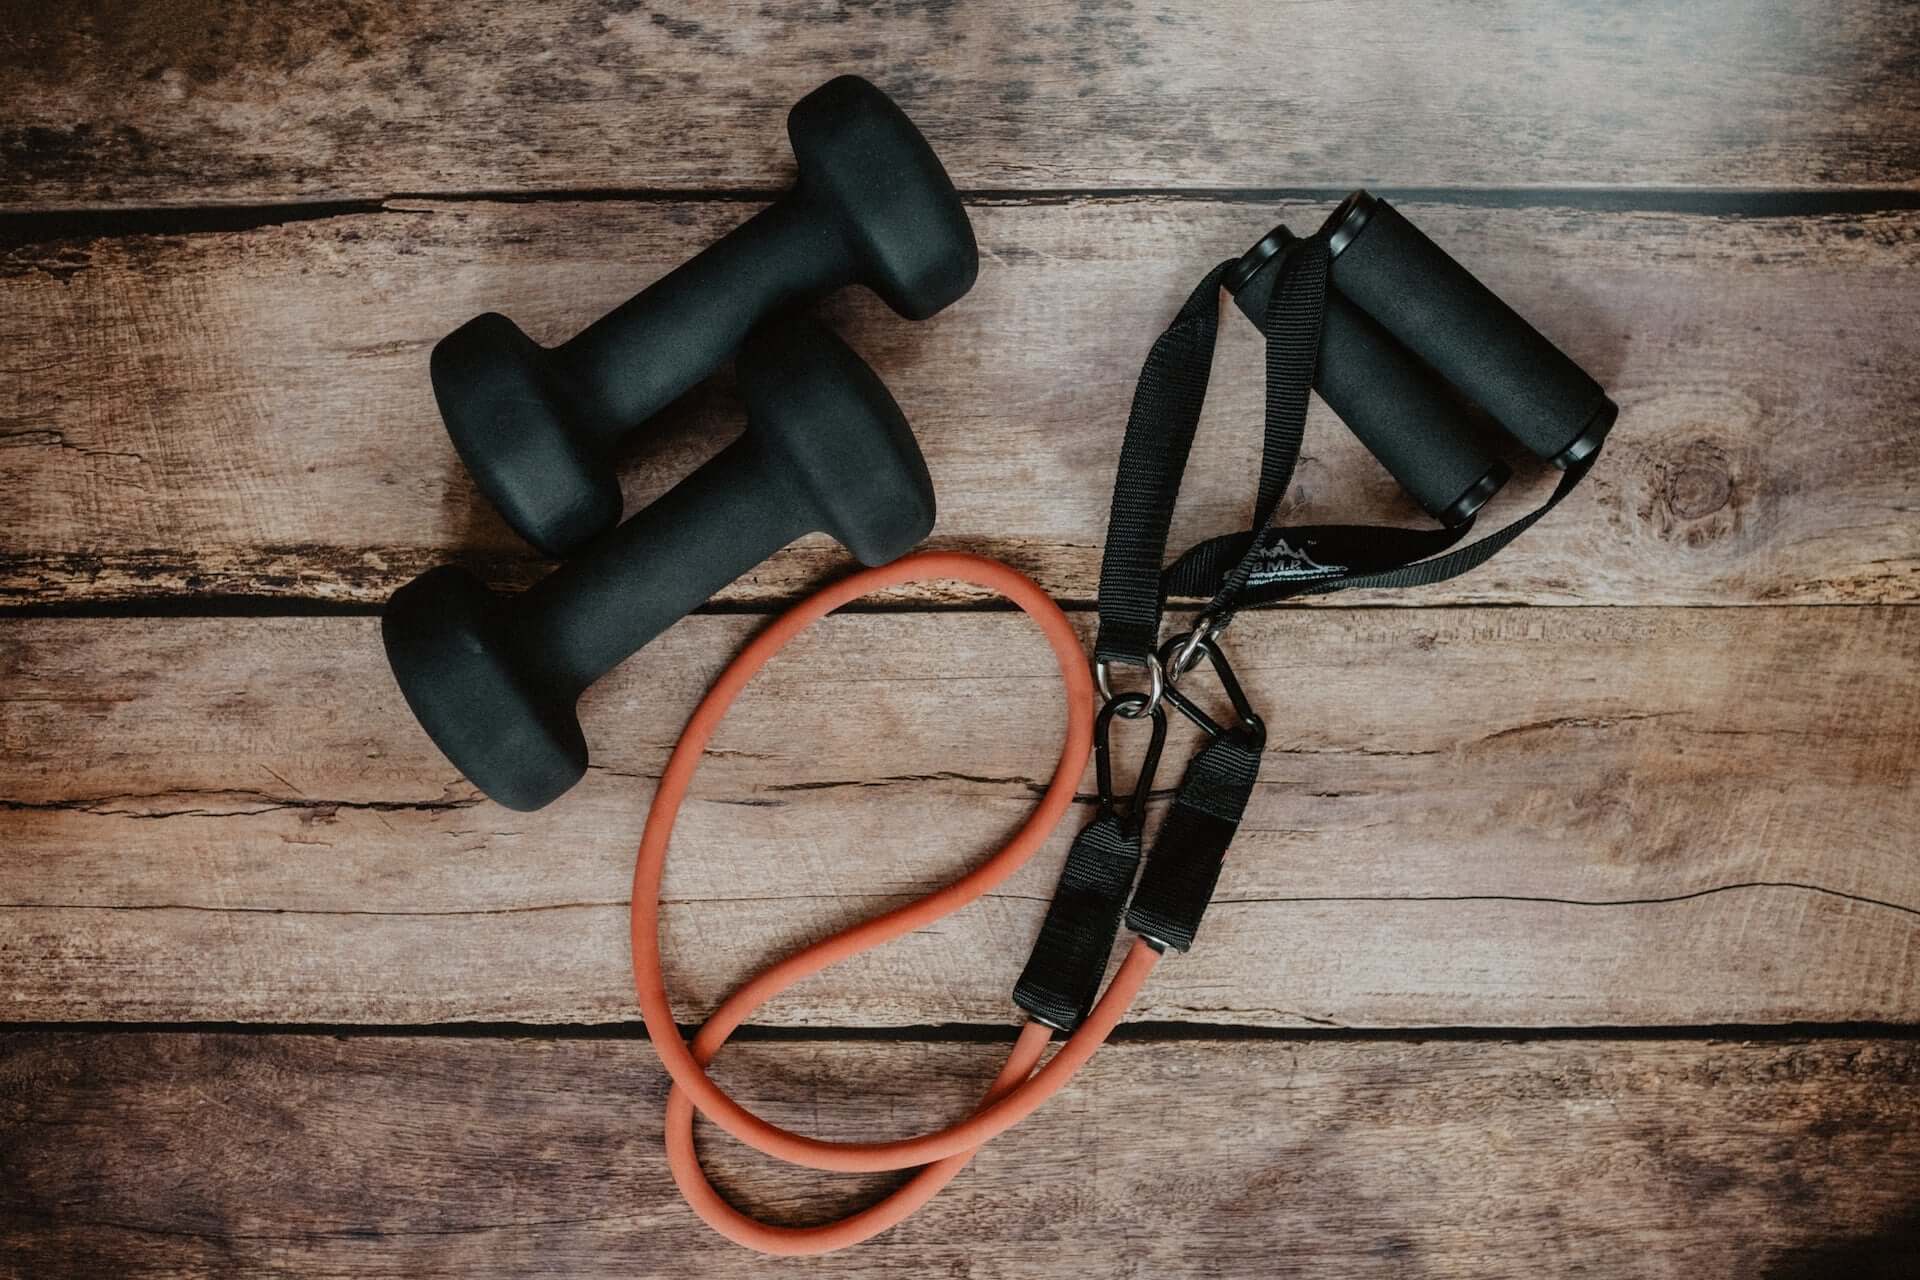 Dumbbells and a resistance band.